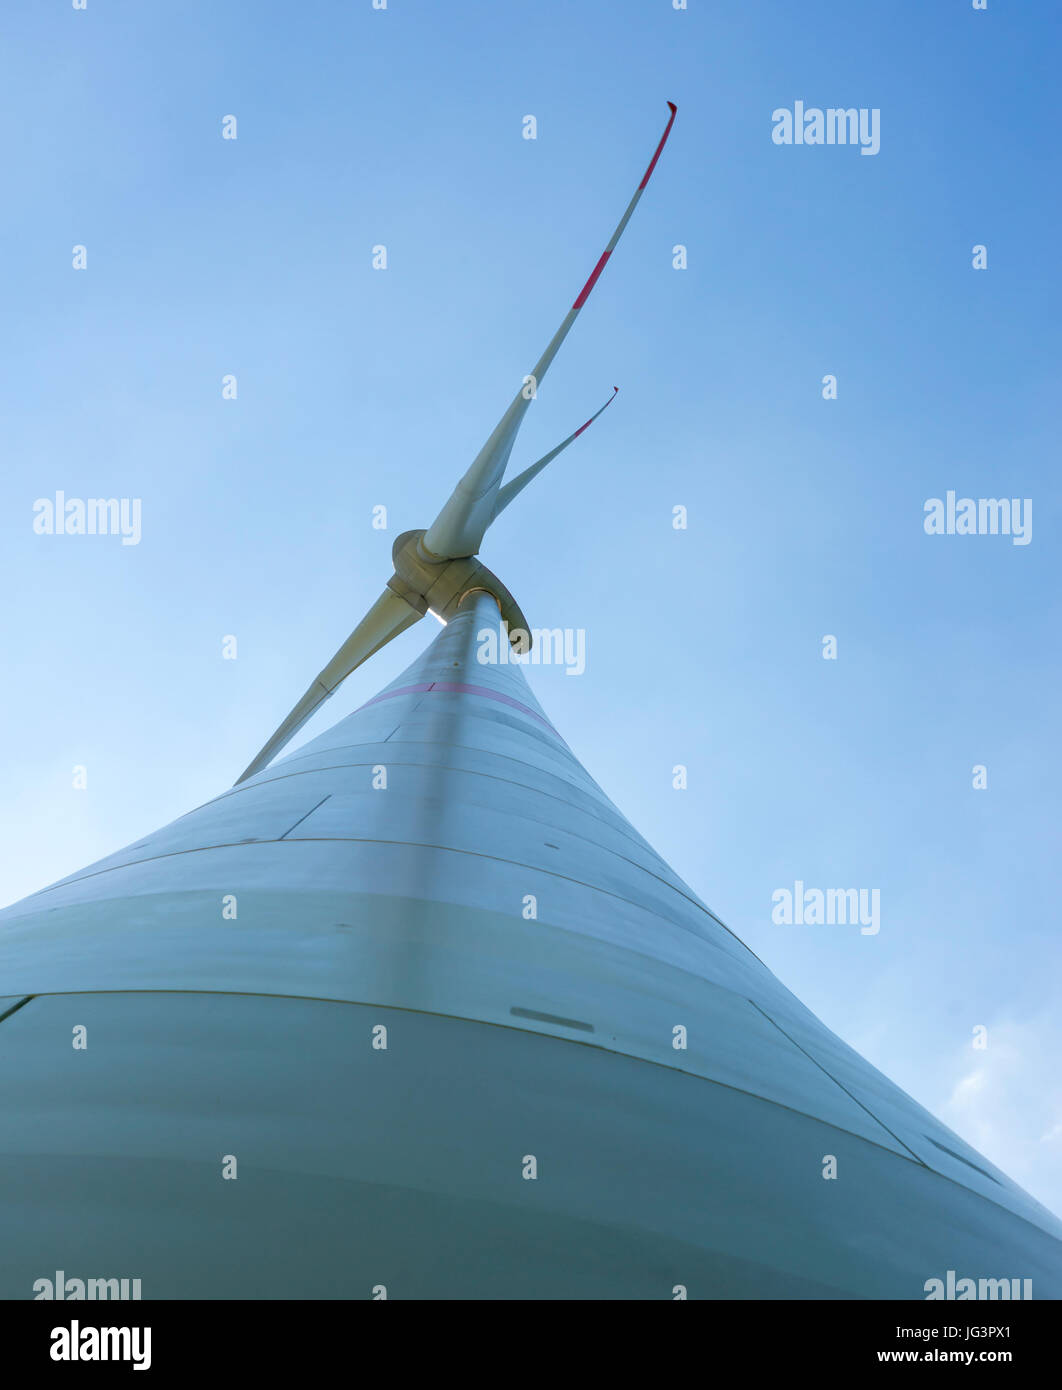 extreme low angle shot of a wind turbine Stock Photo